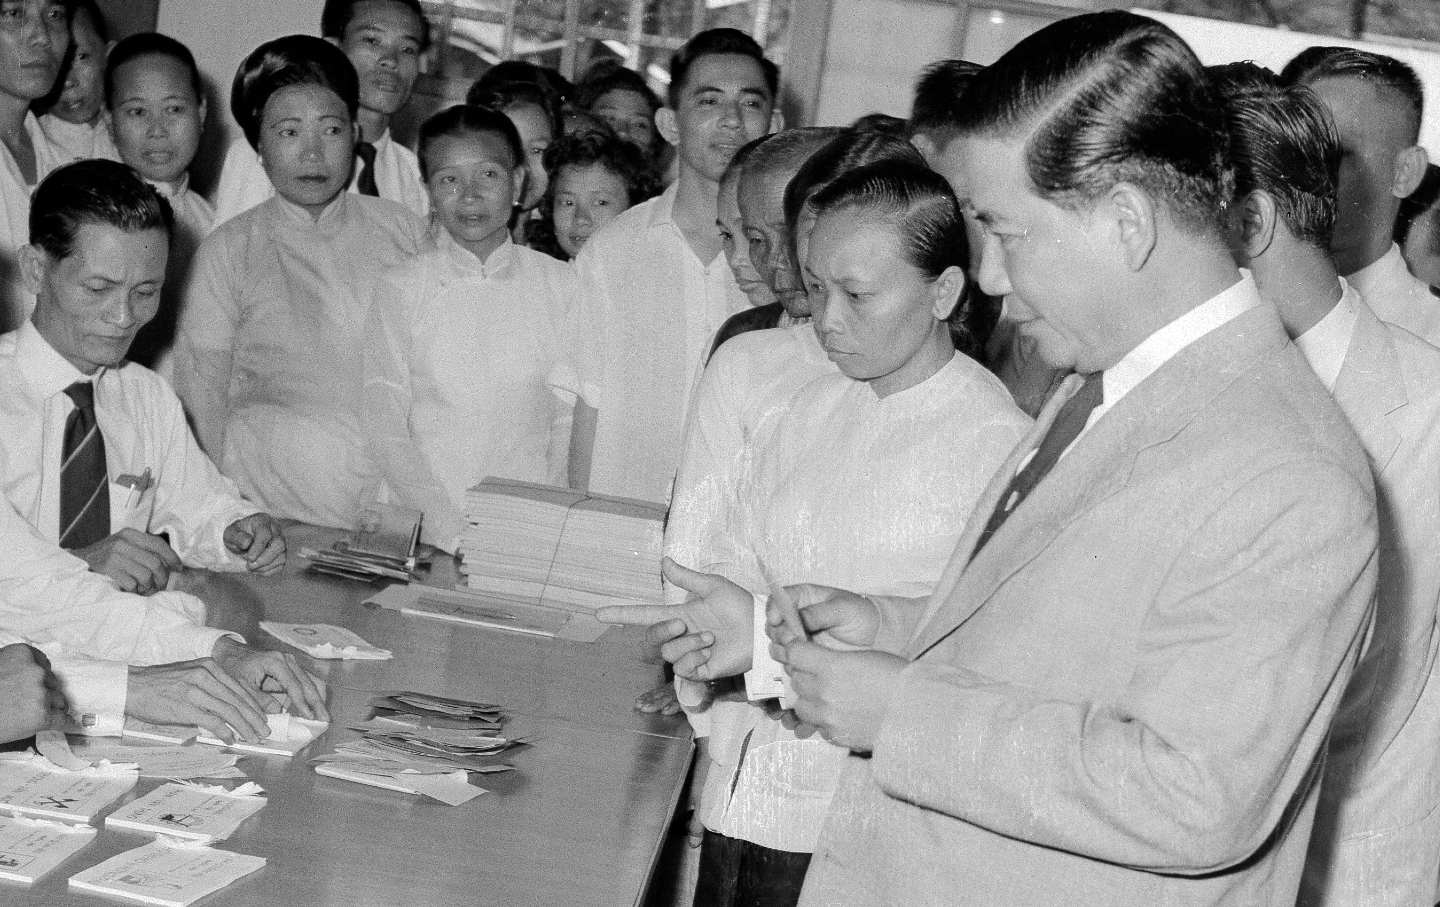 South Vietnamese President Ngo Dinh Diem votes in Saigon, Aug. 30, 1959. At the time, Diem’s government enjoyed American political and military assistance, but by late 1963, he would be overthrown and assassinated, having lost U.S. support.